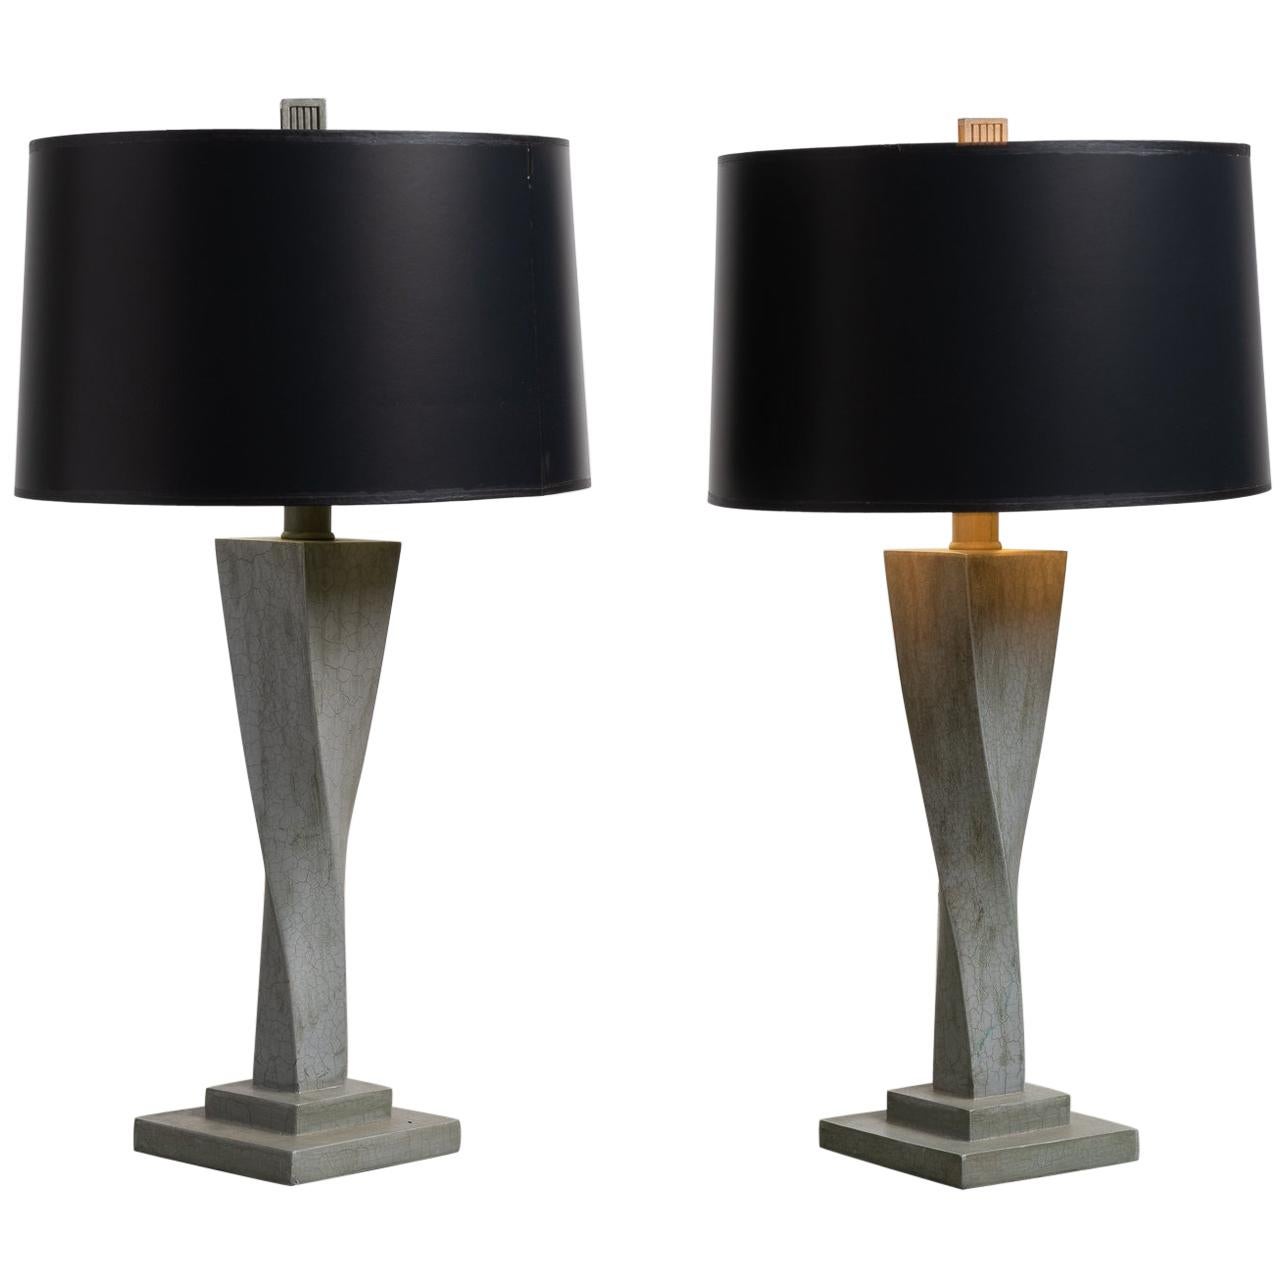 Pair of Twisted Grey Ceramic Table Lamps, America, circa 1950